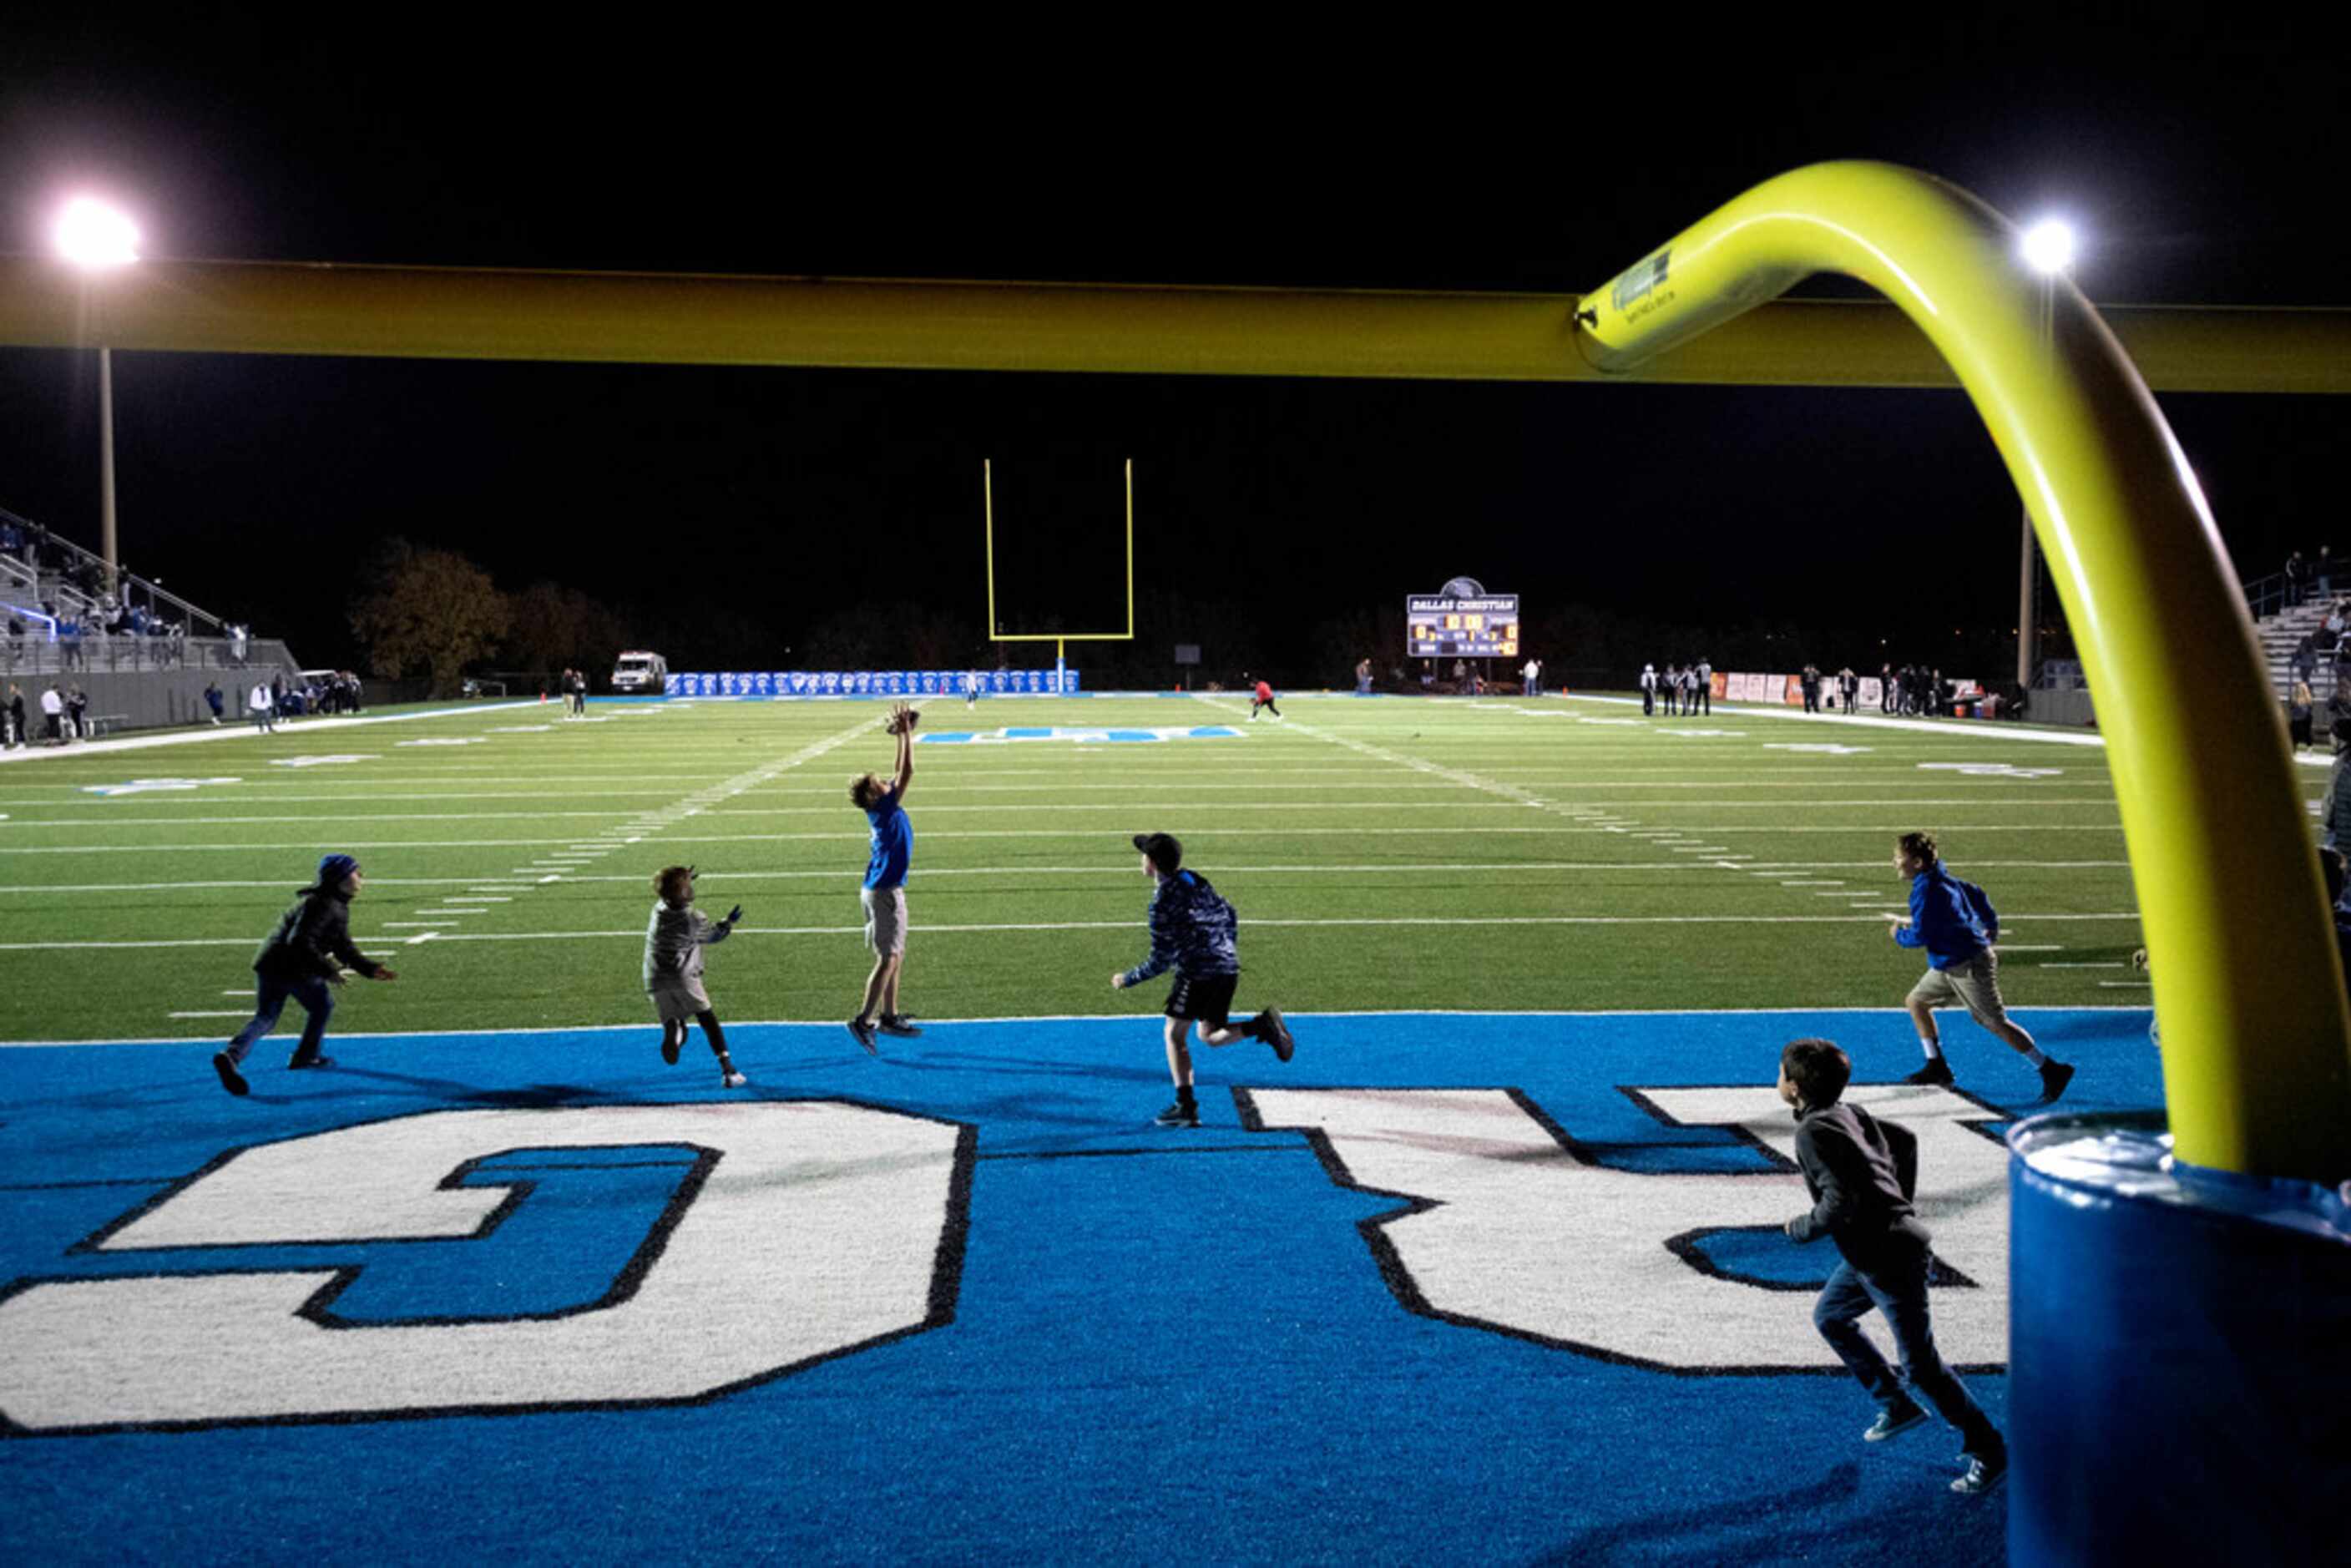 Boys play pick-up football on the field before the start of a high school football playoff...